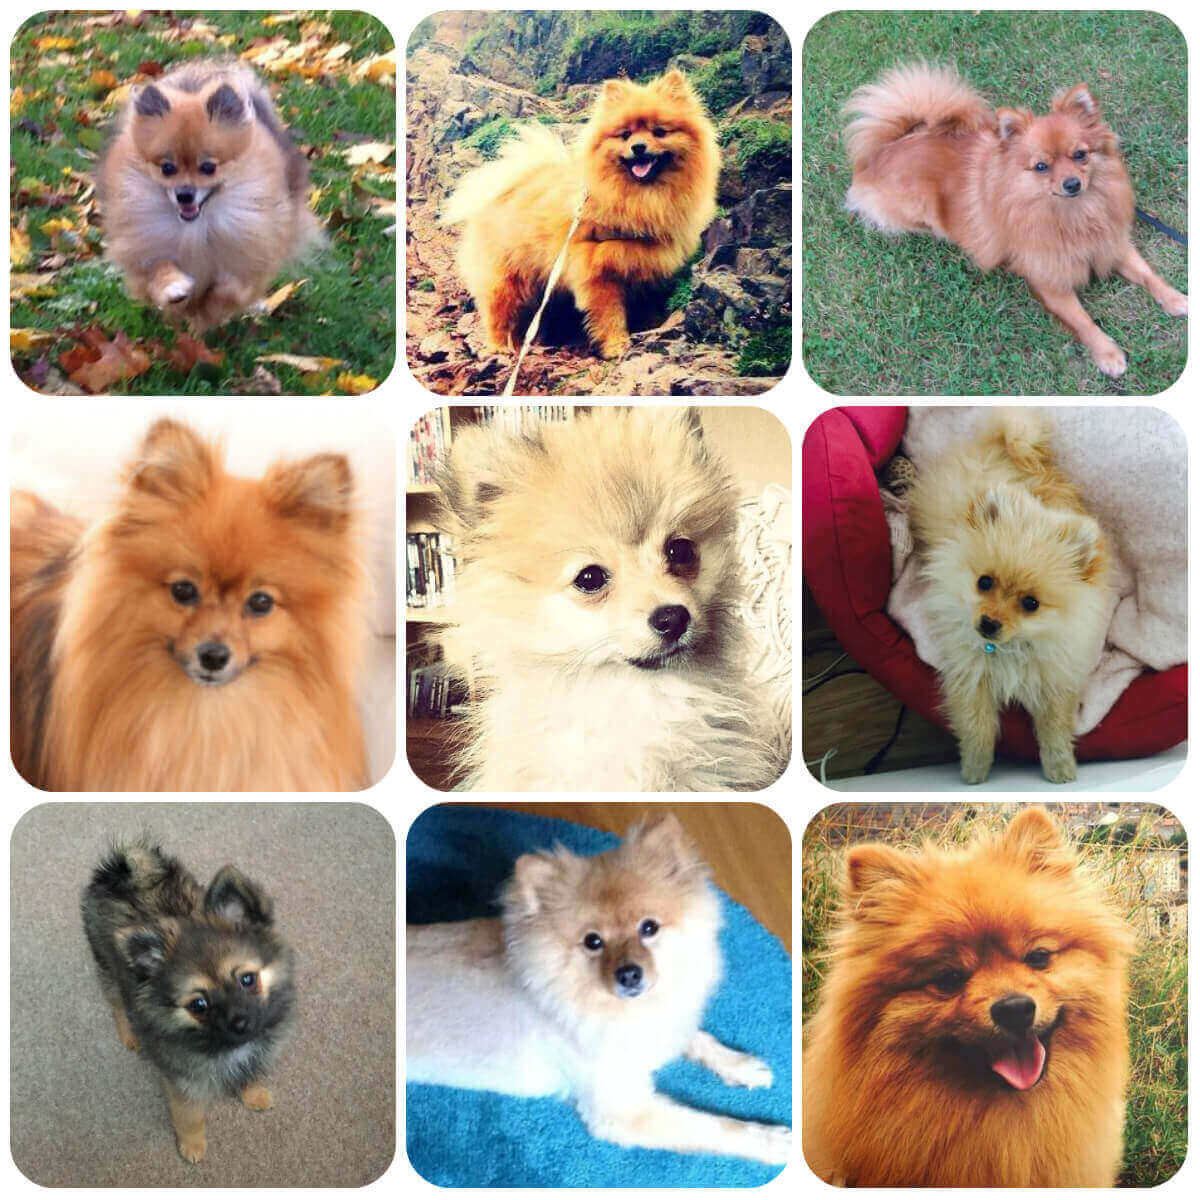 A collage of images of Pomeranians. They are all small, fluffy dogs with small, pointy ears but range in colour